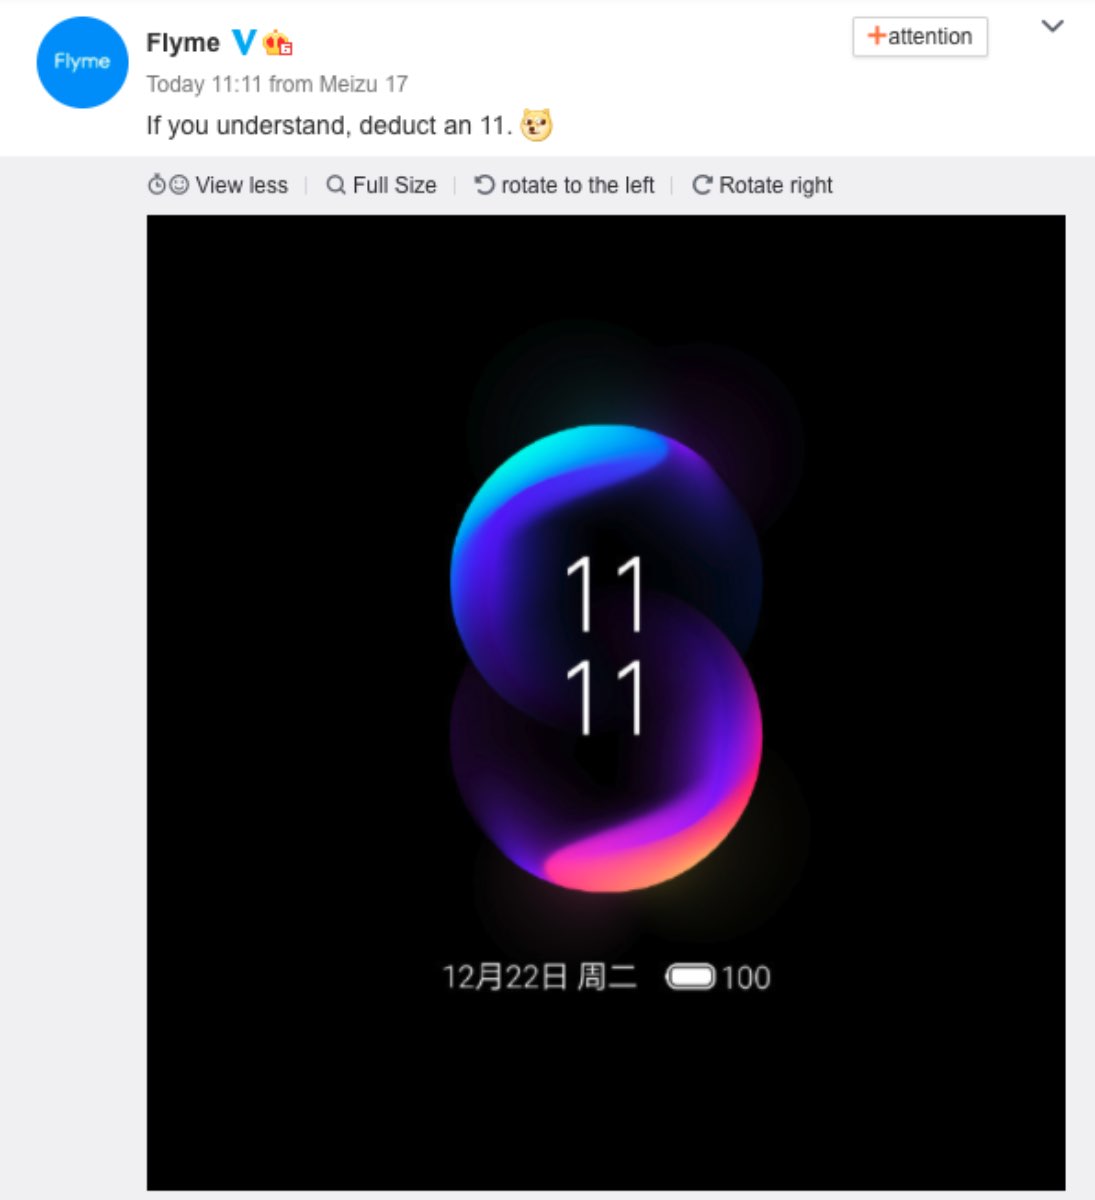 meizu flyme android 11 poster